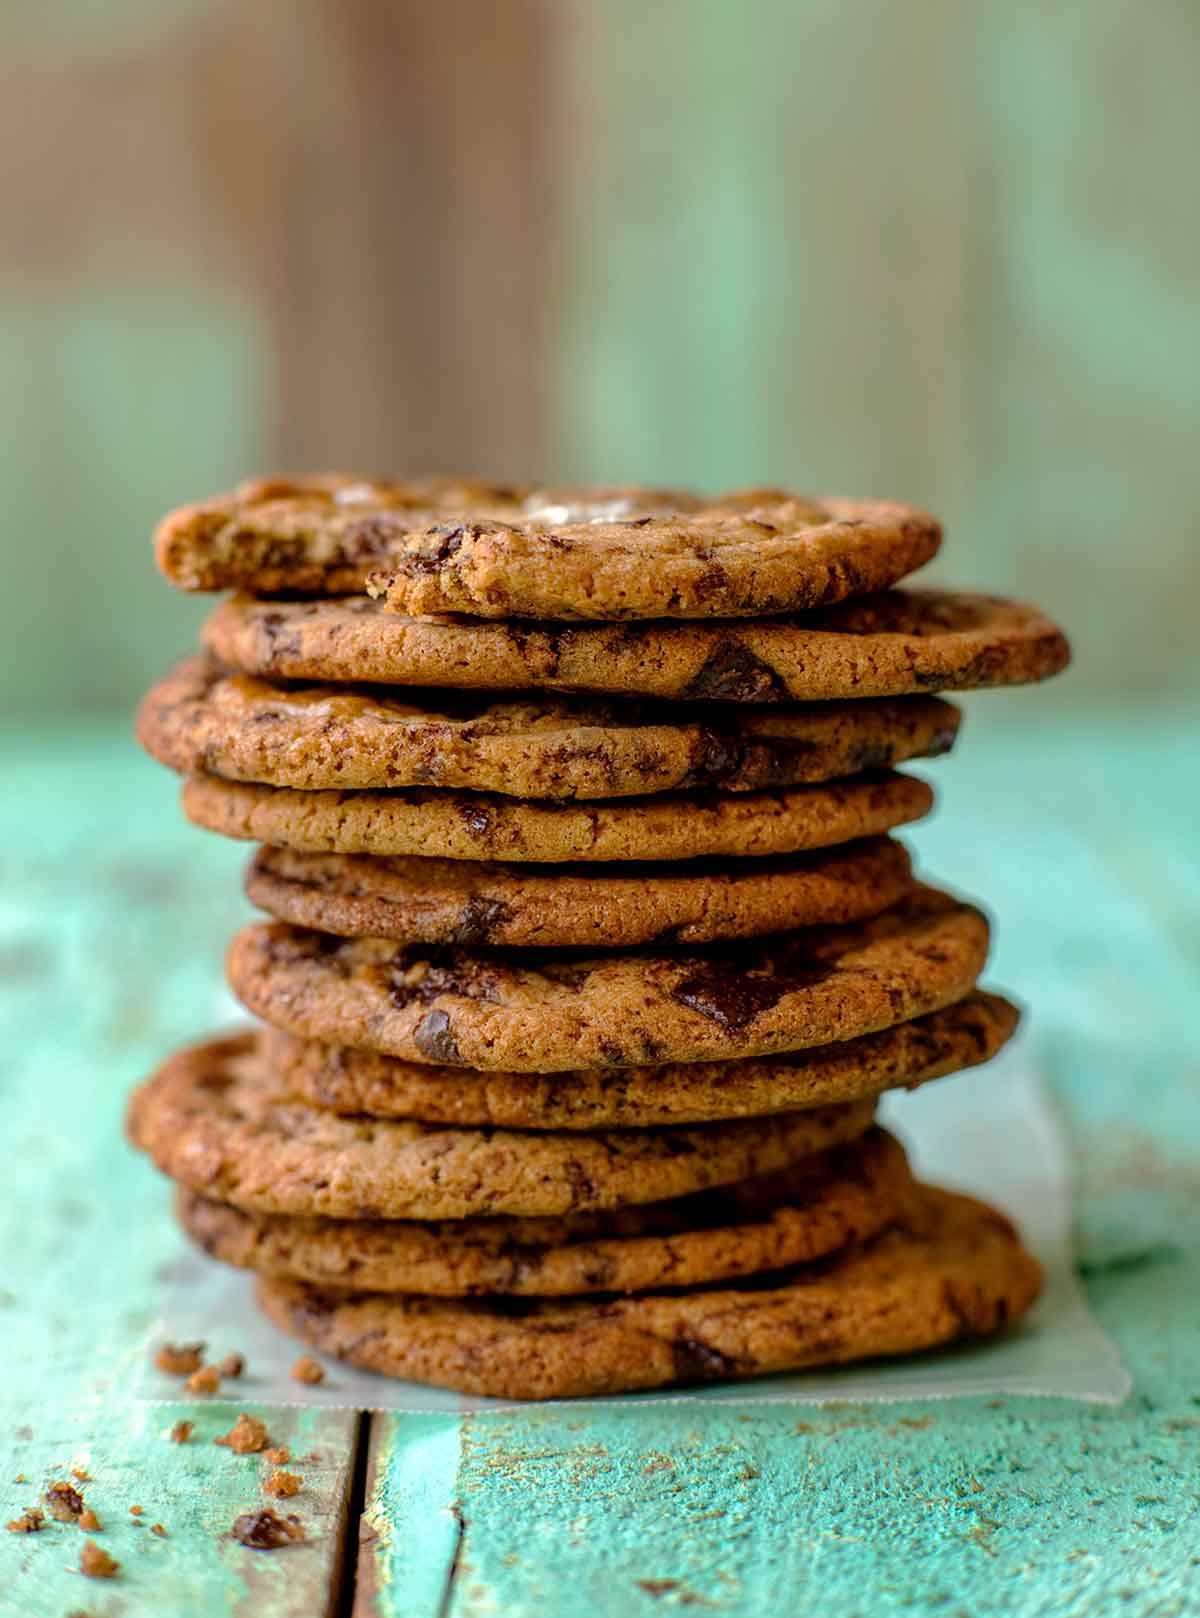 Stack of 10 chocolate chip cookies, each topped with sea salt, on a teal piece of wood